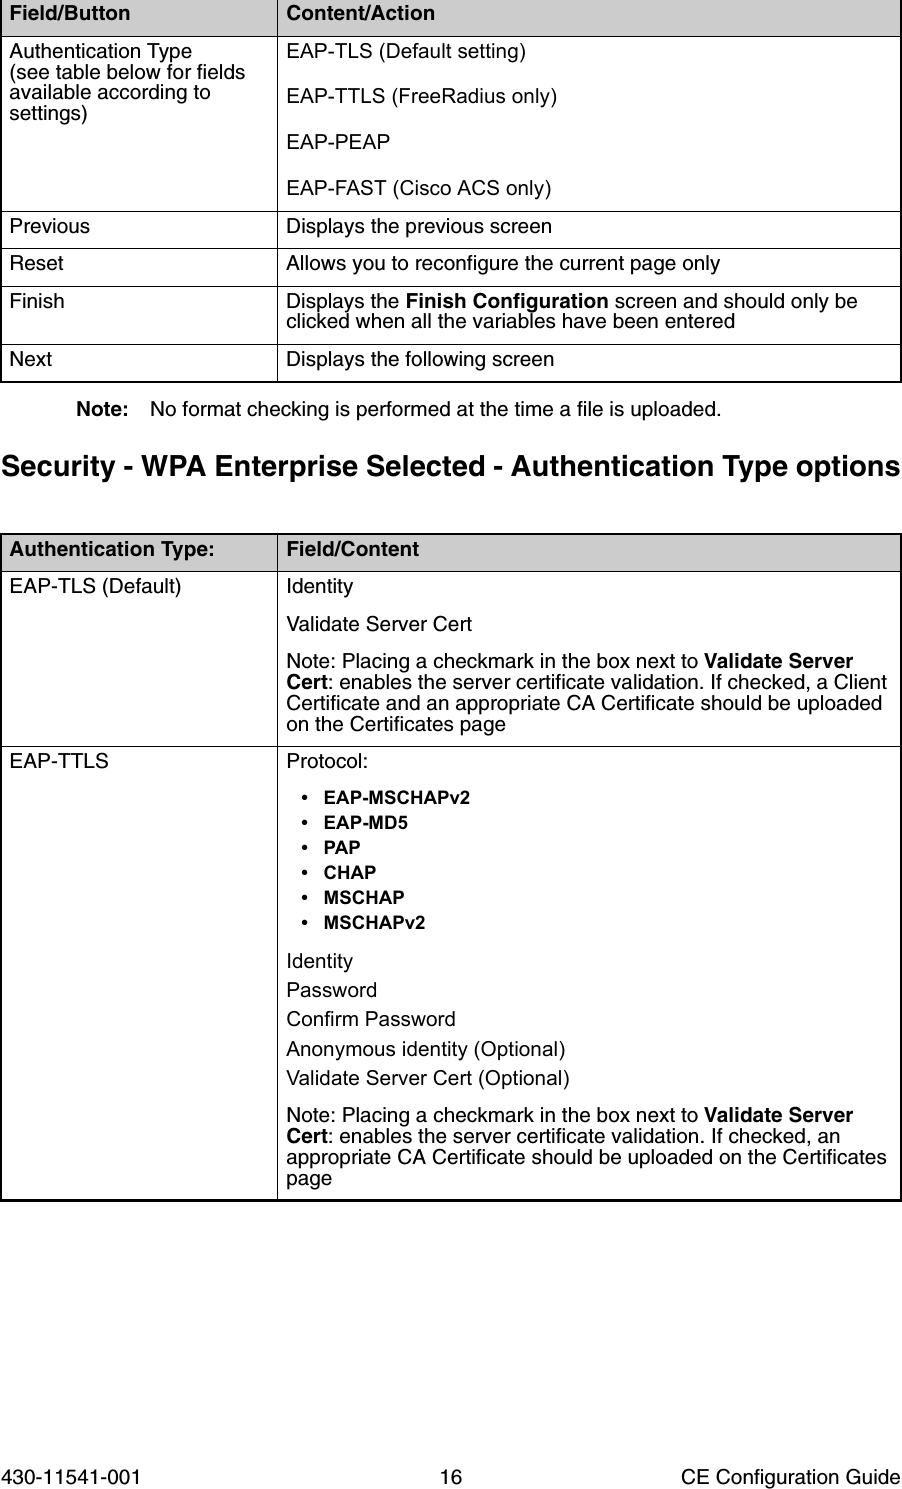 430-11541-001 16 CE Configuration GuideNote: No format checking is performed at the time a file is uploaded.Security - WPA Enterprise Selected - Authentication Type optionsAuthentication Type (see table below for fields available according to settings)EAP-TLS (Default setting)EAP-TTLS (FreeRadius only)EAP-PEAPEAP-FAST (Cisco ACS only)Previous Displays the previous screenReset Allows you to reconfigure the current page onlyFinish Displays the Finish Configuration screen and should only be clicked when all the variables have been enteredNext Displays the following screenAuthentication Type: Field/ContentEAP-TLS (Default) IdentityValidate Server CertNote: Placing a checkmark in the box next to Validate Server Cert: enables the server certificate validation. If checked, a Client Certificate and an appropriate CA Certificate should be uploaded on the Certificates pageEAP-TTLS Protocol:• EAP-MSCHAPv2• EAP-MD5•PAP• CHAP• MSCHAP• MSCHAPv2Identity Password Confirm PasswordAnonymous identity (Optional) Validate Server Cert (Optional)Note: Placing a checkmark in the box next to Validate Server Cert: enables the server certificate validation. If checked, an appropriate CA Certificate should be uploaded on the Certificates pageField/Button Content/Action